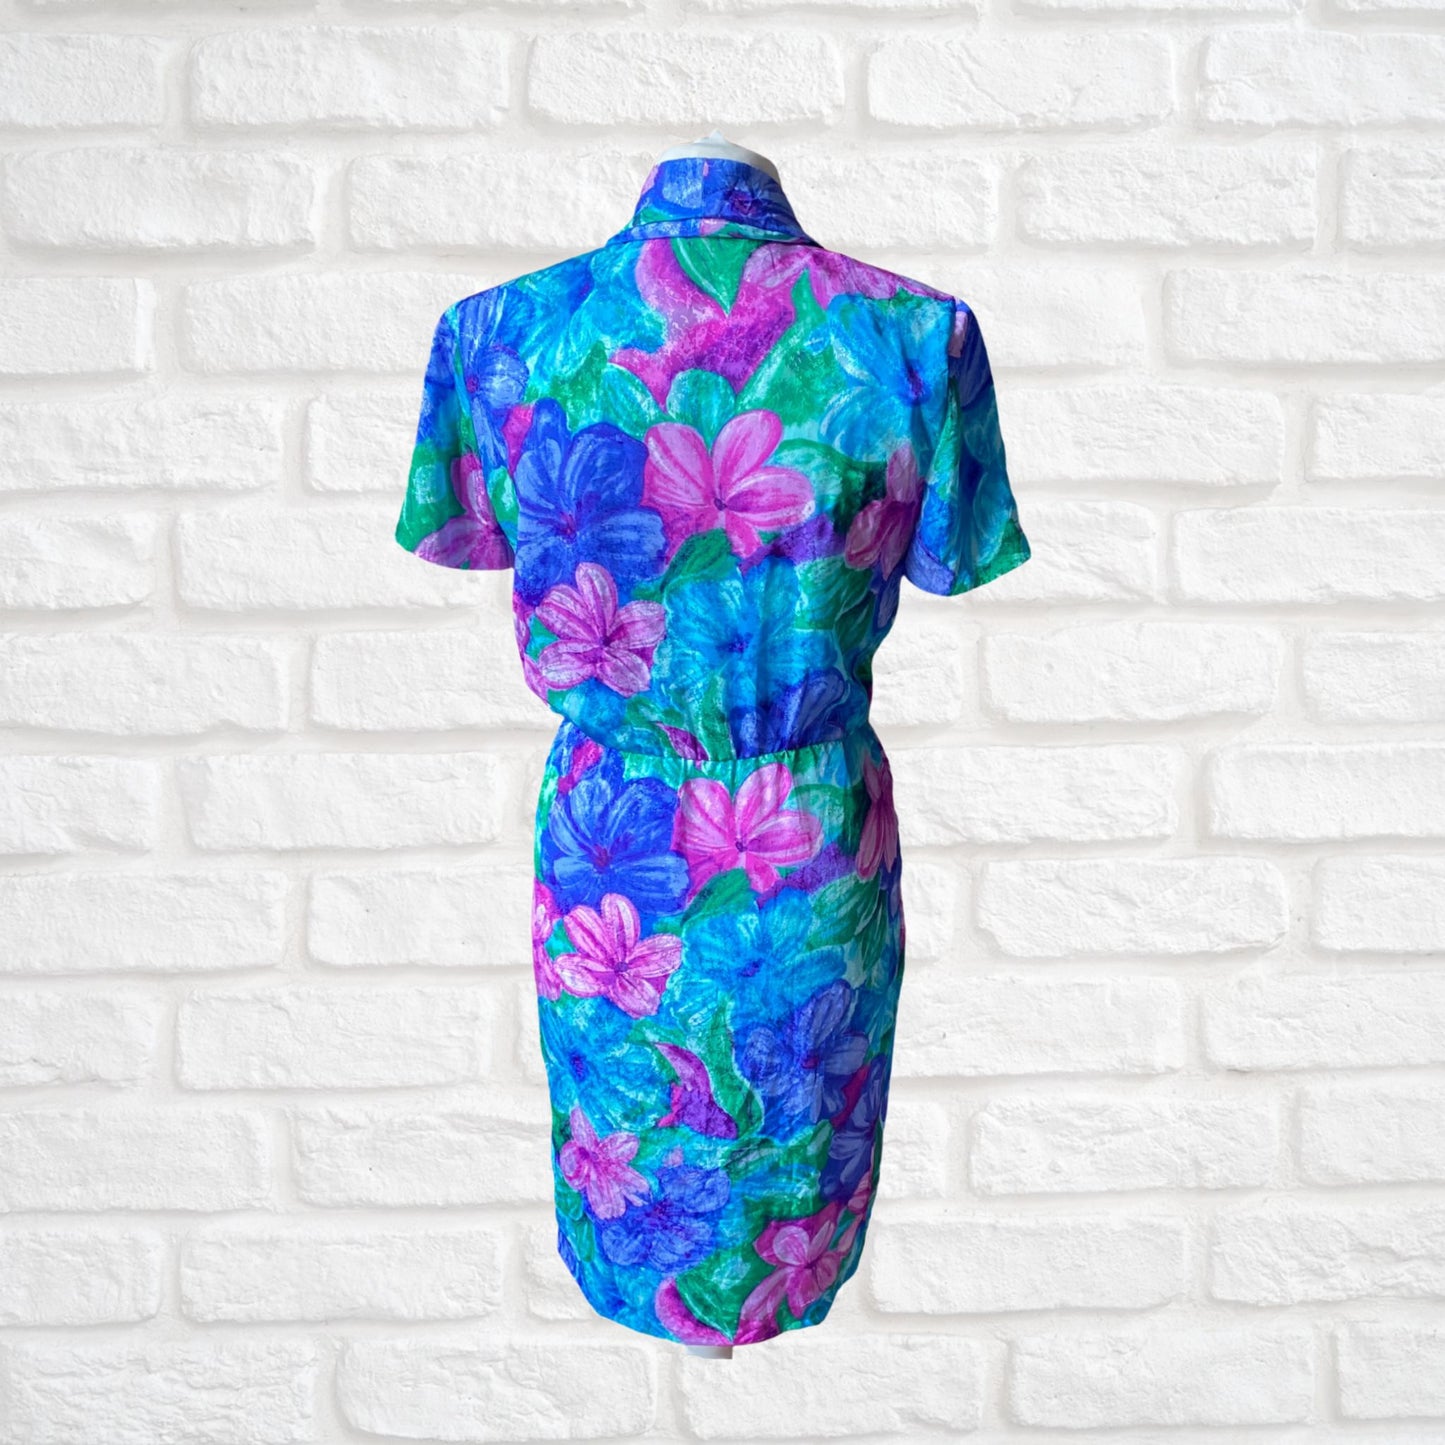 Vintage 80s Silky Purple, Pink, Green, and Blue Floral Wrap  Dress. Approx UK size 12-14